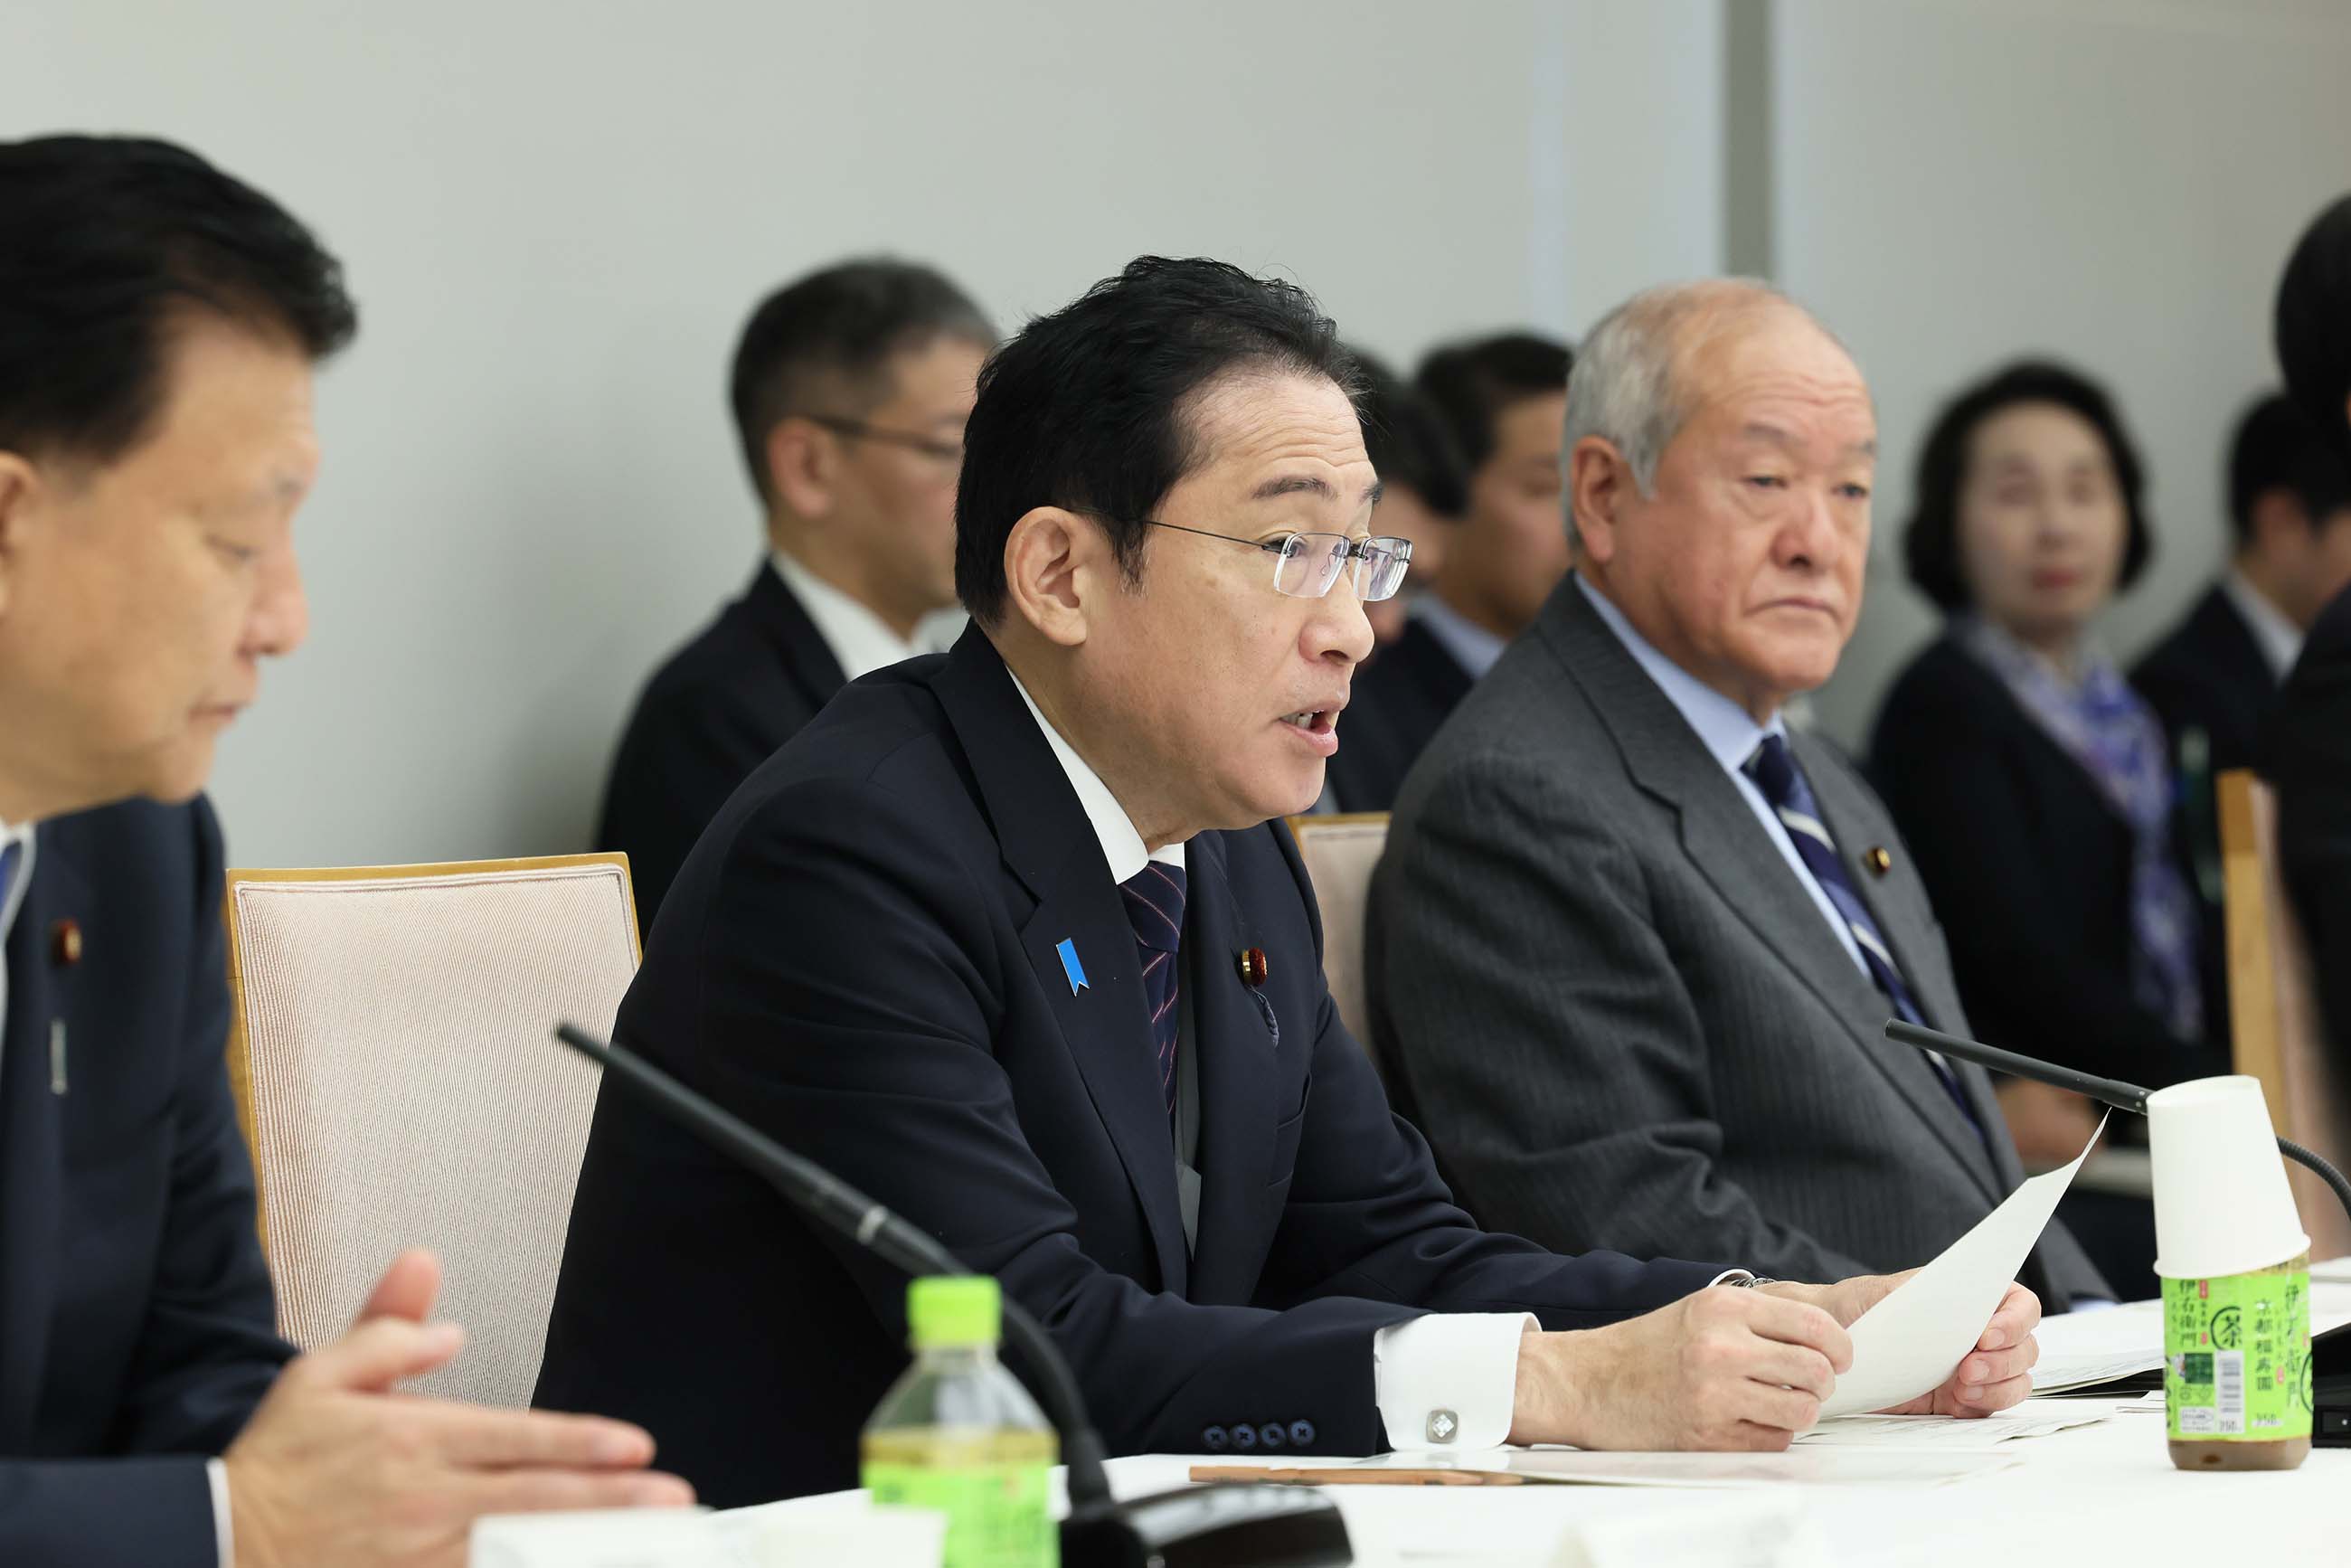 Meeting of the Council on Economic and Fiscal Policy